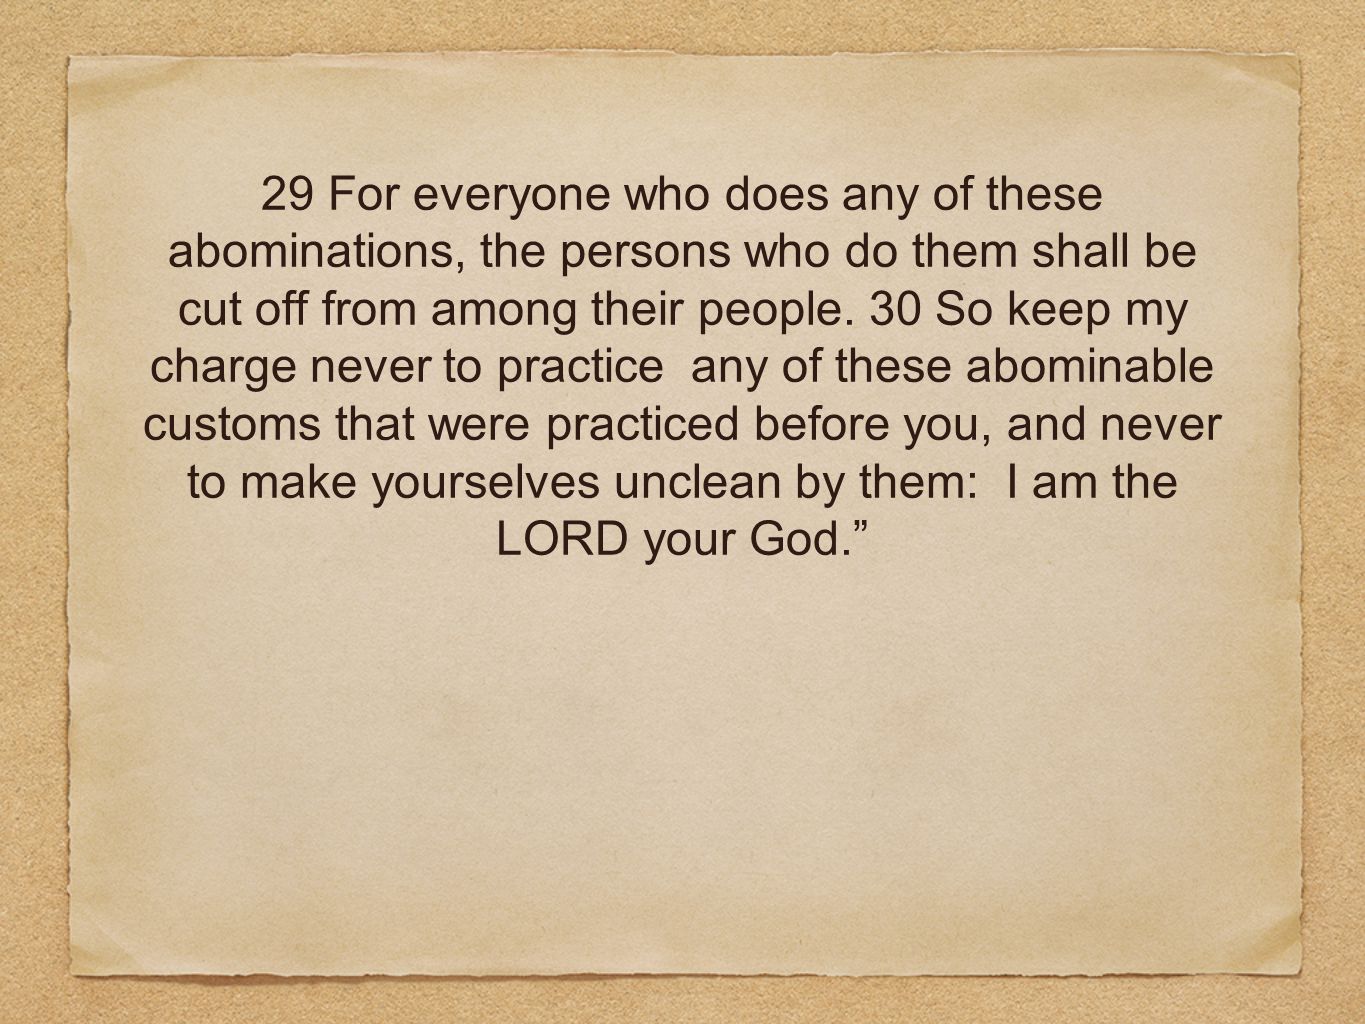 29 For everyone who does any of these abominations, the persons who do them shall be cut off from among their people.